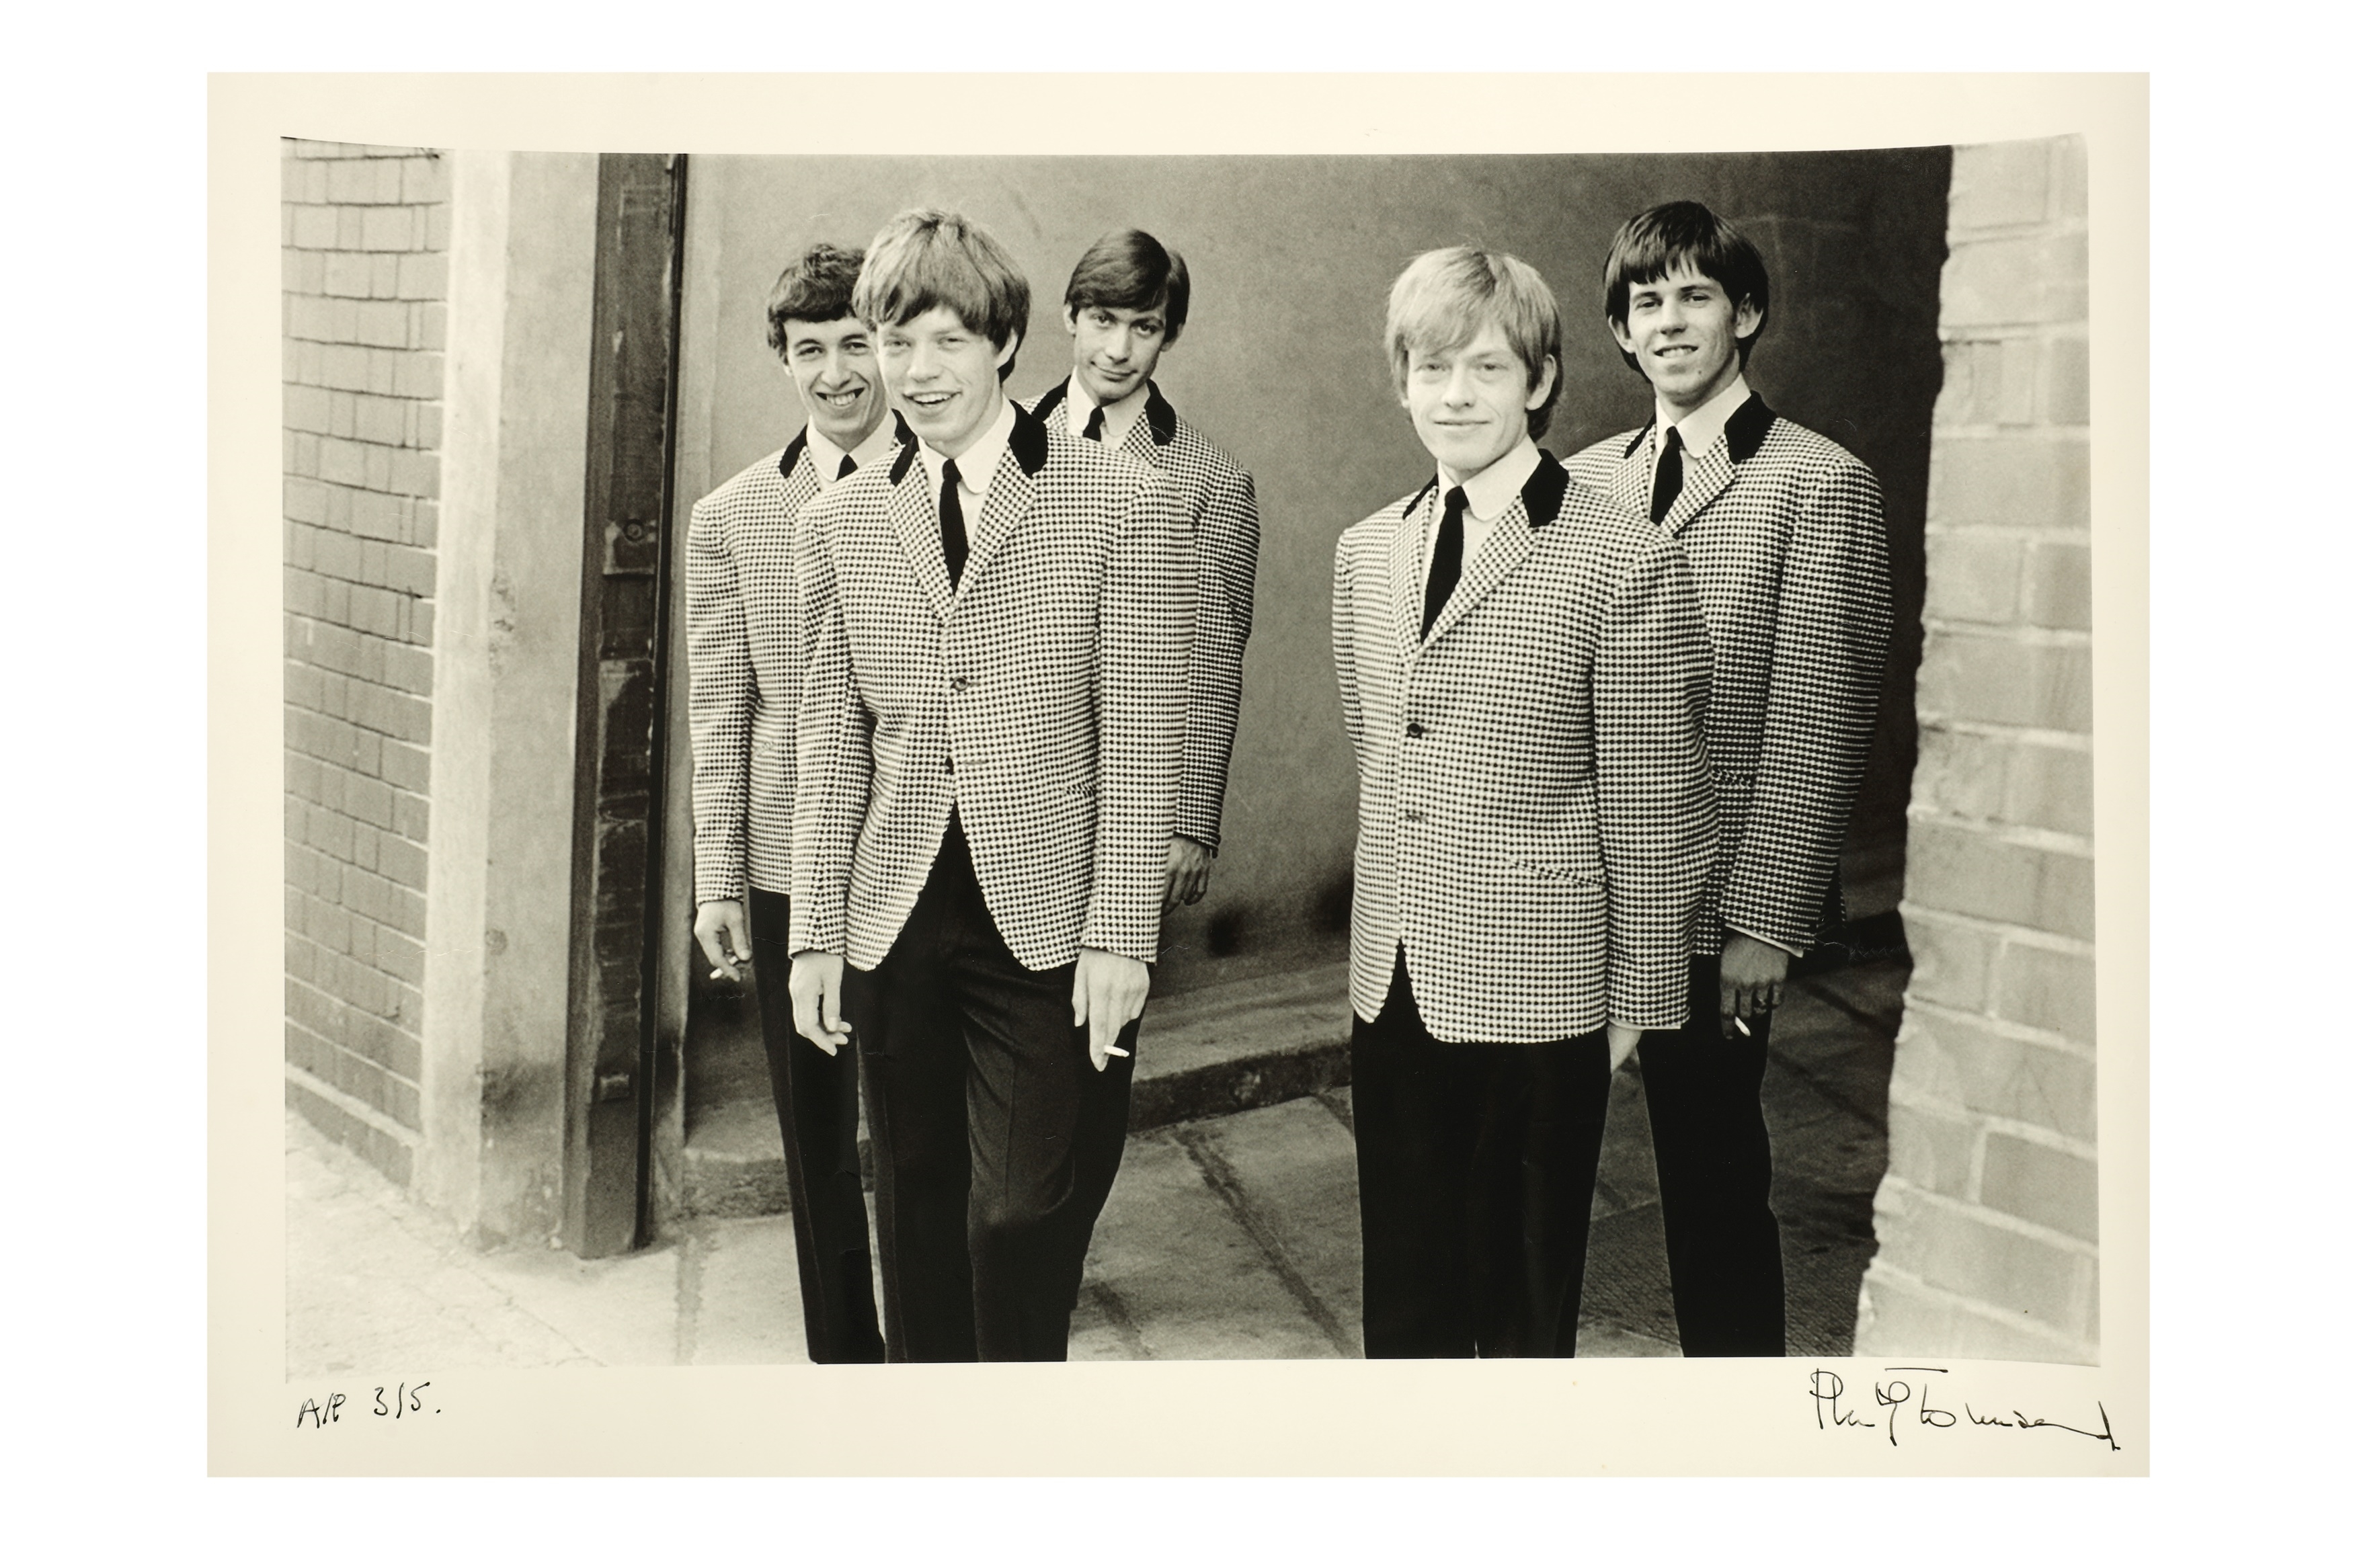 
THE ROLLING STONES by Philip Townsend, 1962